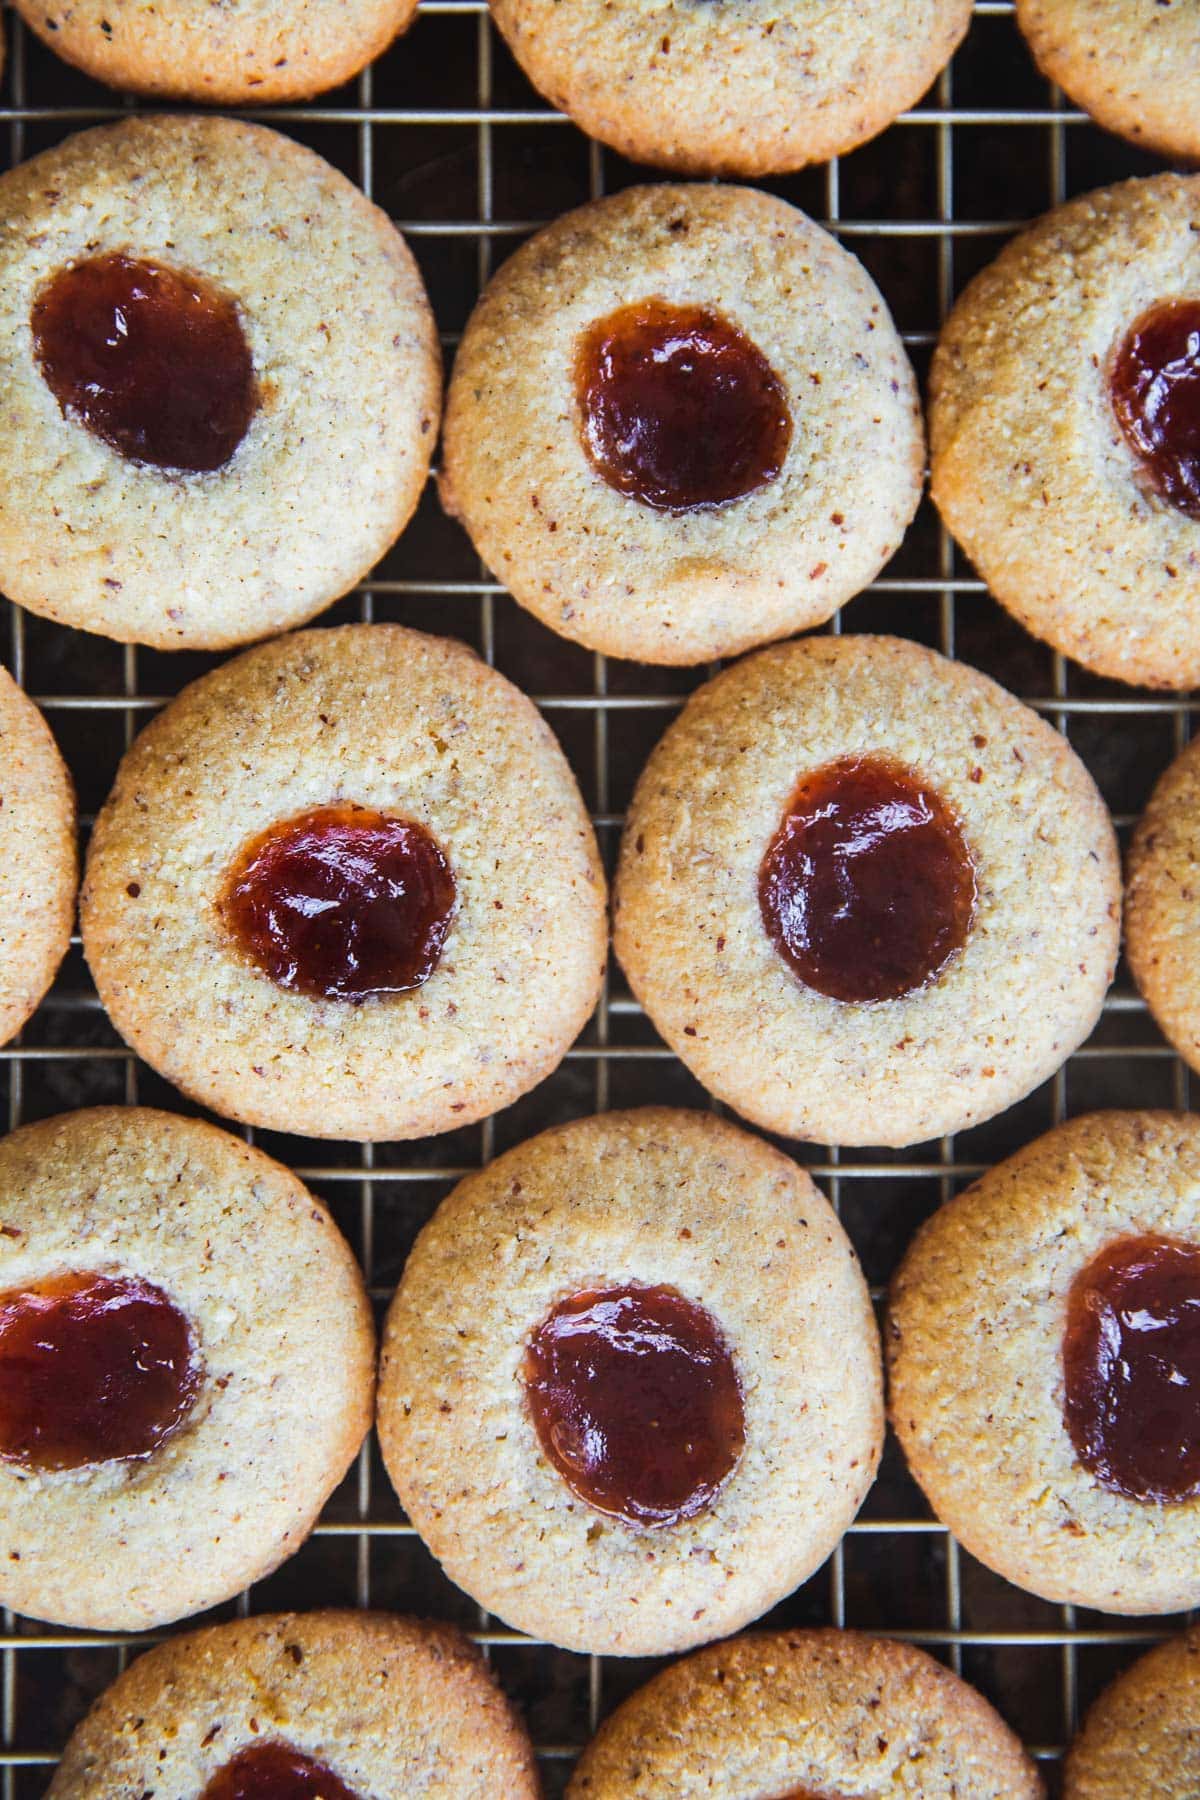 Baked Frangipane Jam Drops lined up on a wire rack, strawberry jam glistening in pools on each biscuit.